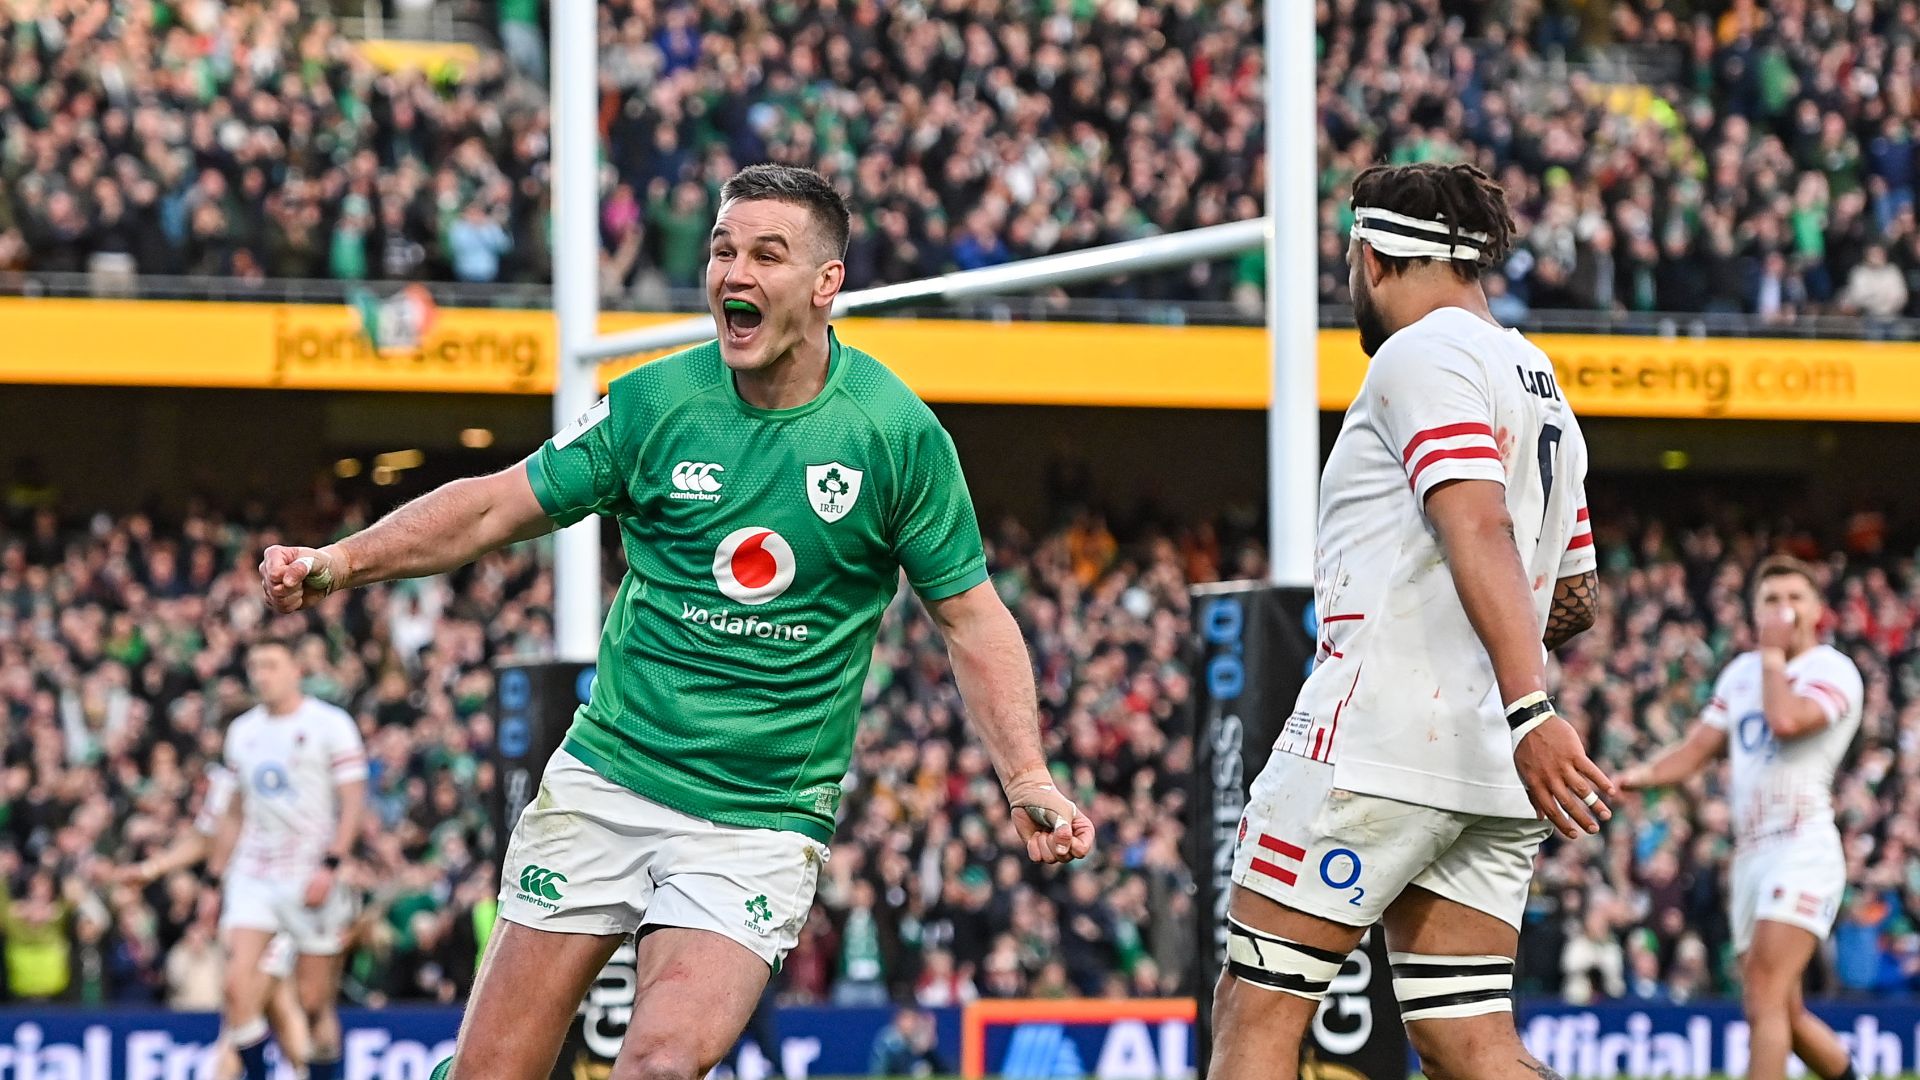 Ireland lands Grand Slam in fitting Six Nations send-off for Sexton